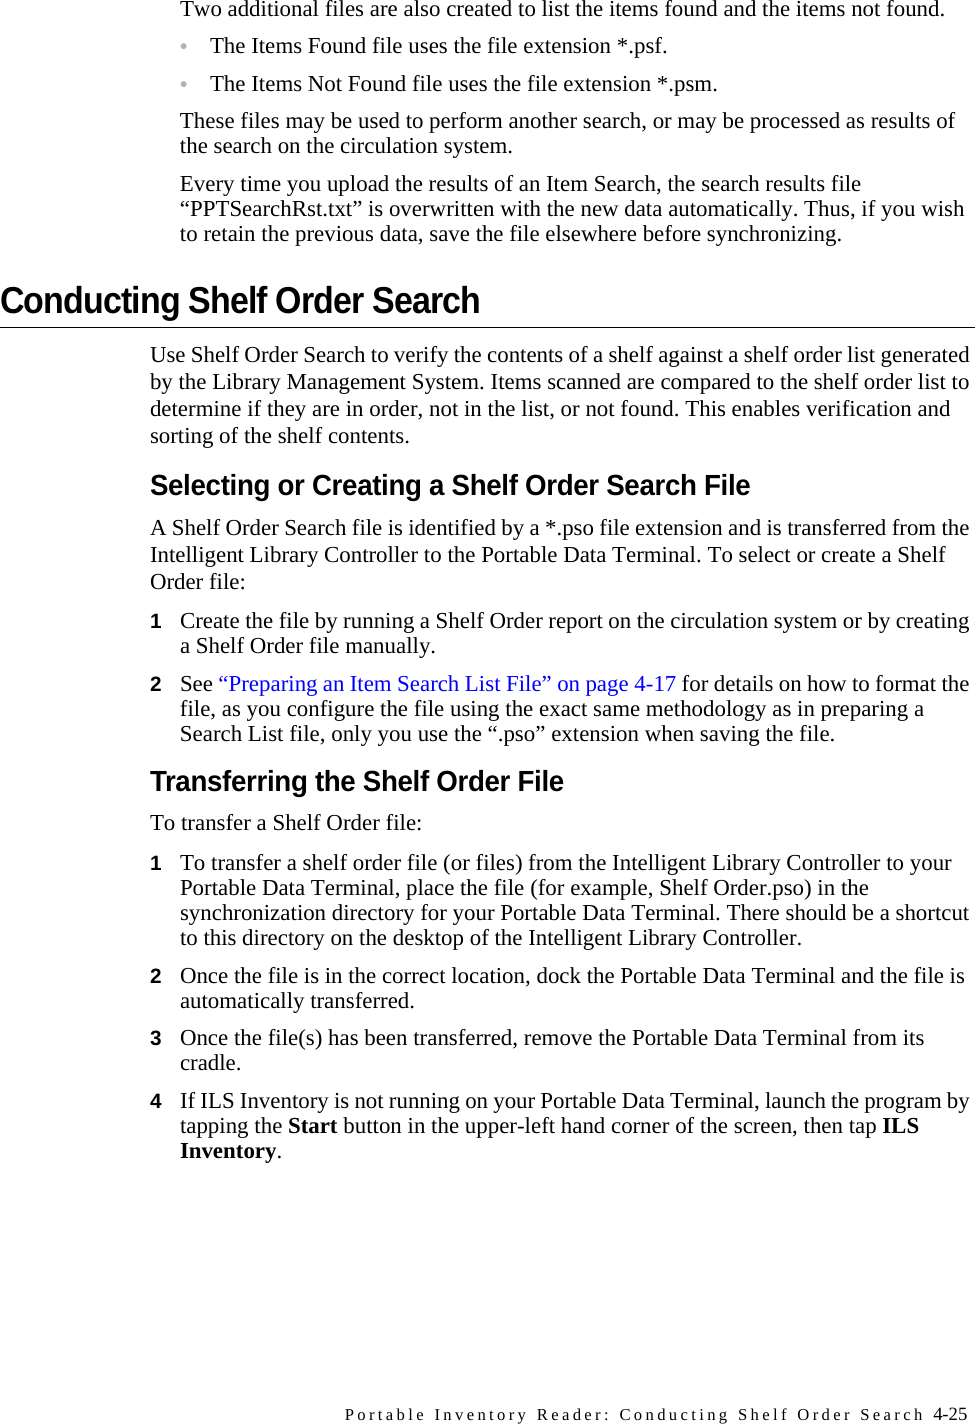 Portable Inventory Reader: Conducting Shelf Order Search 4-25Two additional files are also created to list the items found and the items not found. •The Items Found file uses the file extension *.psf. •The Items Not Found file uses the file extension *.psm. These files may be used to perform another search, or may be processed as results of the search on the circulation system.Every time you upload the results of an Item Search, the search results file “PPTSearchRst.txt” is overwritten with the new data automatically. Thus, if you wish to retain the previous data, save the file elsewhere before synchronizing.Conducting Shelf Order SearchUse Shelf Order Search to verify the contents of a shelf against a shelf order list generated by the Library Management System. Items scanned are compared to the shelf order list to determine if they are in order, not in the list, or not found. This enables verification and sorting of the shelf contents. Selecting or Creating a Shelf Order Search FileA Shelf Order Search file is identified by a *.pso file extension and is transferred from the Intelligent Library Controller to the Portable Data Terminal. To select or create a Shelf Order file:1Create the file by running a Shelf Order report on the circulation system or by creating a Shelf Order file manually. 2See “Preparing an Item Search List File” on page 4-17 for details on how to format the file, as you configure the file using the exact same methodology as in preparing a Search List file, only you use the “.pso” extension when saving the file. Transferring the Shelf Order FileTo transfer a Shelf Order file:1To transfer a shelf order file (or files) from the Intelligent Library Controller to your Portable Data Terminal, place the file (for example, Shelf Order.pso) in the synchronization directory for your Portable Data Terminal. There should be a shortcut to this directory on the desktop of the Intelligent Library Controller. 2Once the file is in the correct location, dock the Portable Data Terminal and the file is automatically transferred. 3Once the file(s) has been transferred, remove the Portable Data Terminal from its cradle.4If ILS Inventory is not running on your Portable Data Terminal, launch the program by tapping the Start button in the upper-left hand corner of the screen, then tap ILS Inventory.